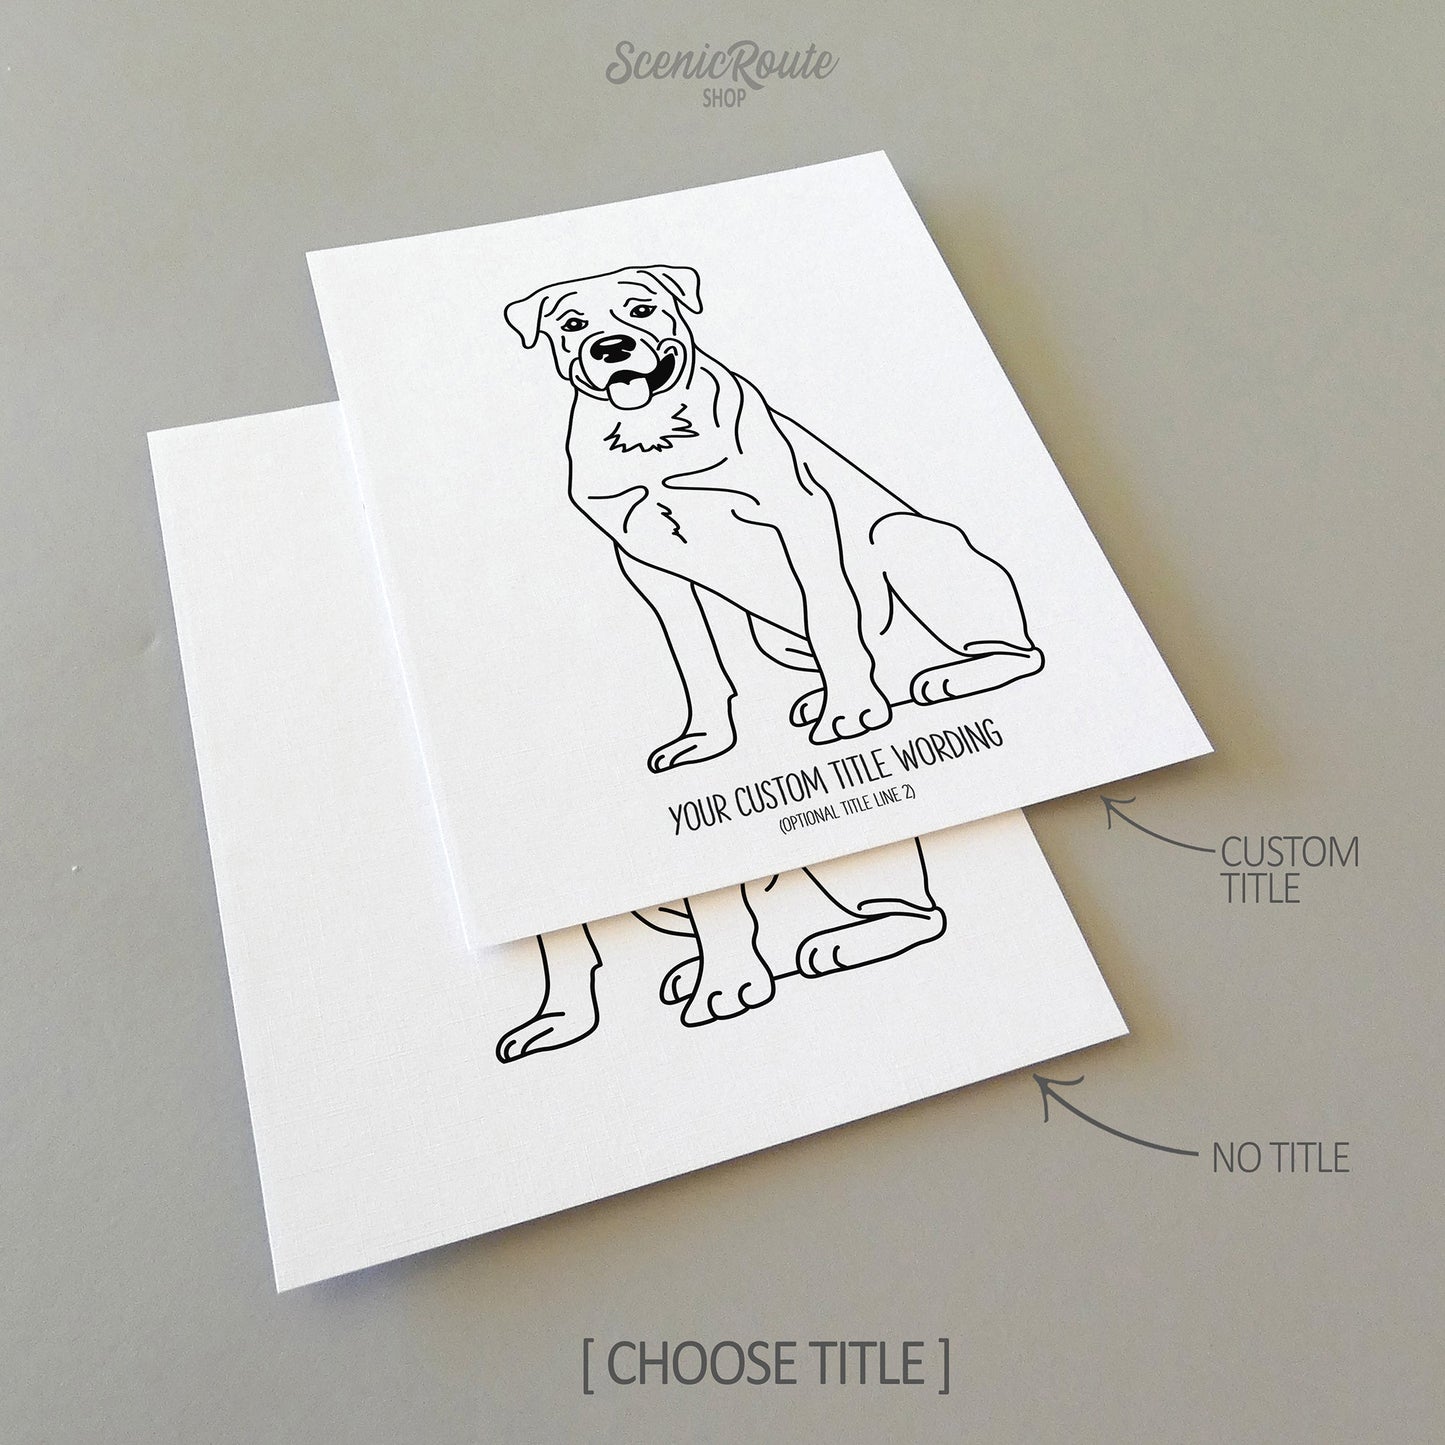 Two line art drawings of a Rottweiler dog on white linen paper with a gray background.  The pieces are shown with “No Title” and “Custom Title” options for the available art print options.